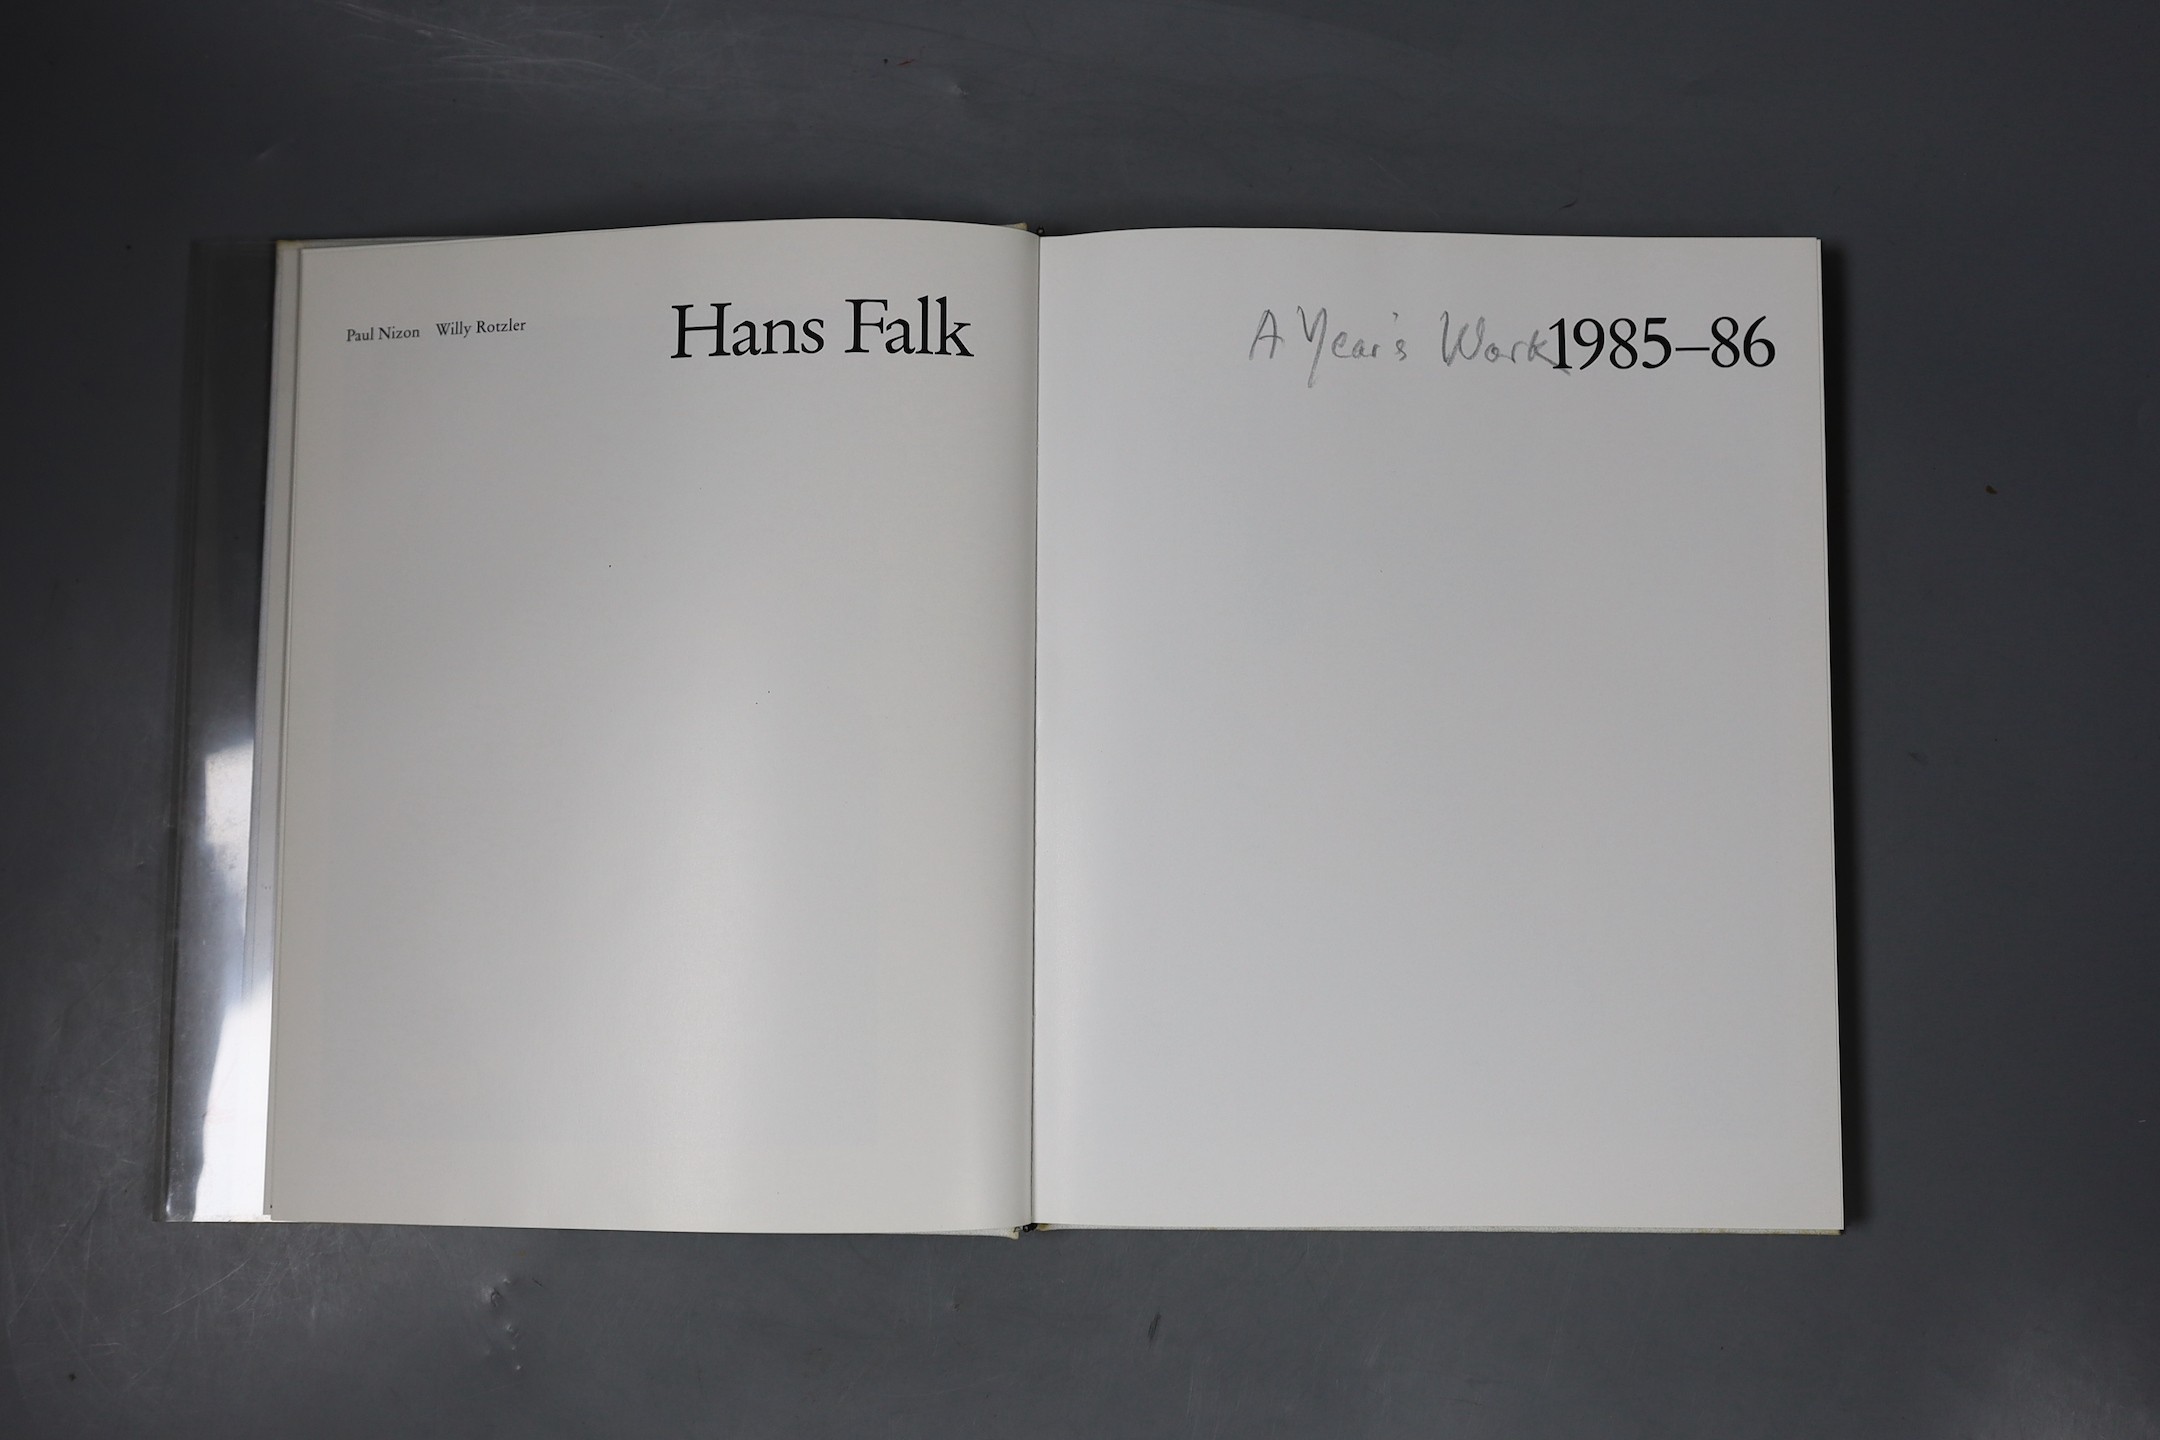 Hans Falk ‘A Year’s Work 1985-86’ catalogue, published by Edition Artefides Luzern in cloth binding with uniquely decorated acrylic dust jacket